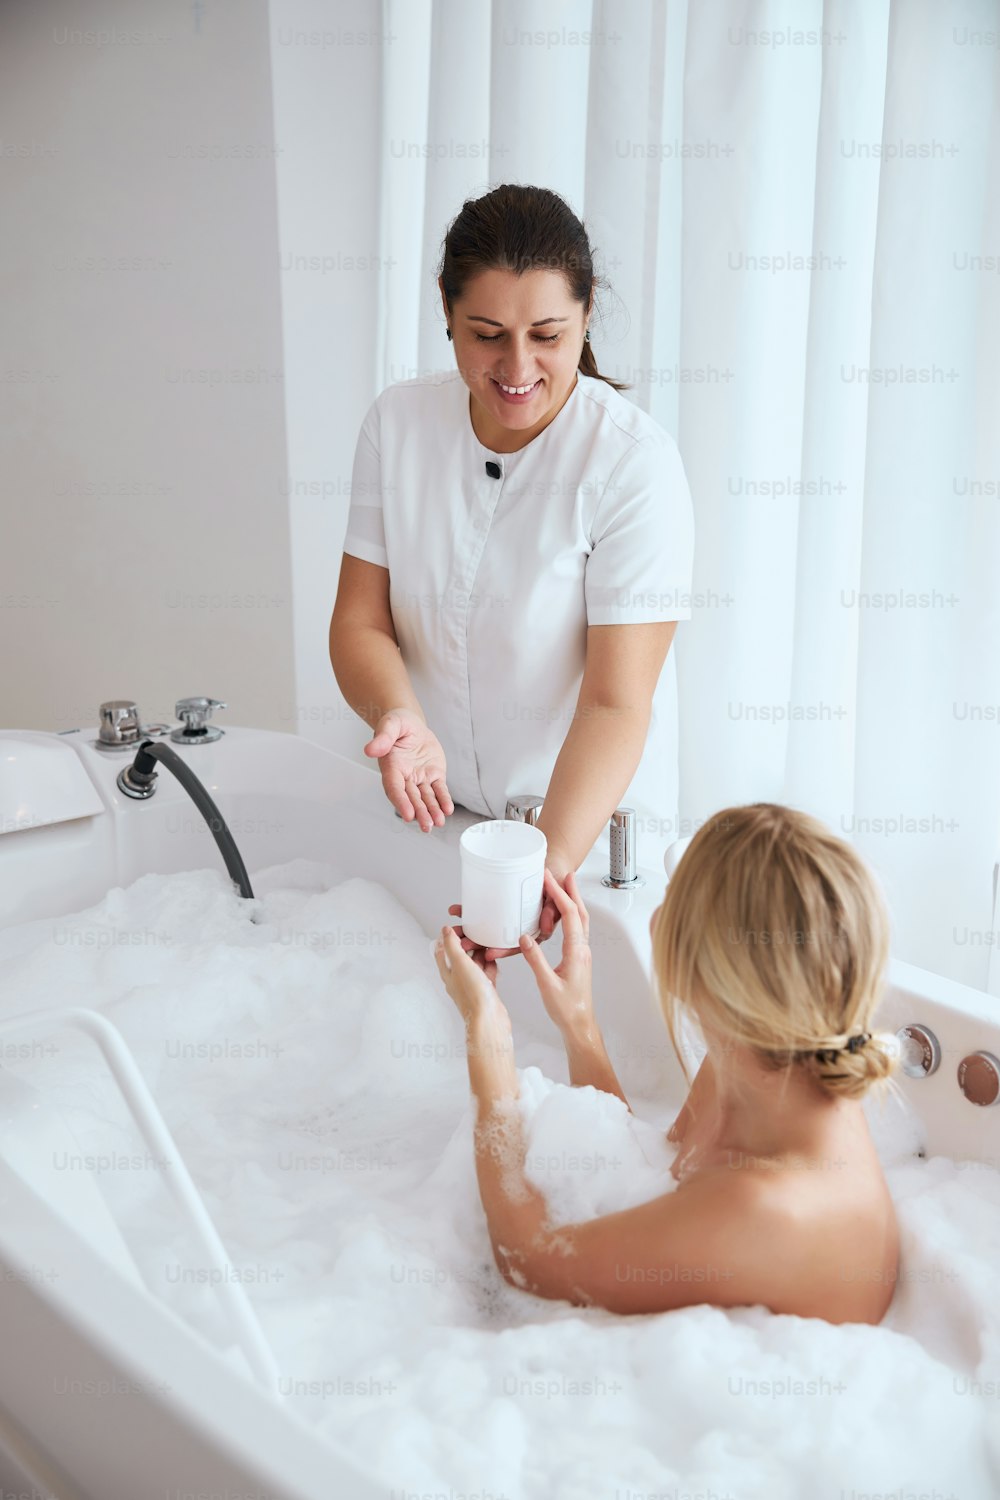 Back view portrait of elegant pretty female sitting in hydro massage bath tube and professional female worker demonstrating jar with cream for patient